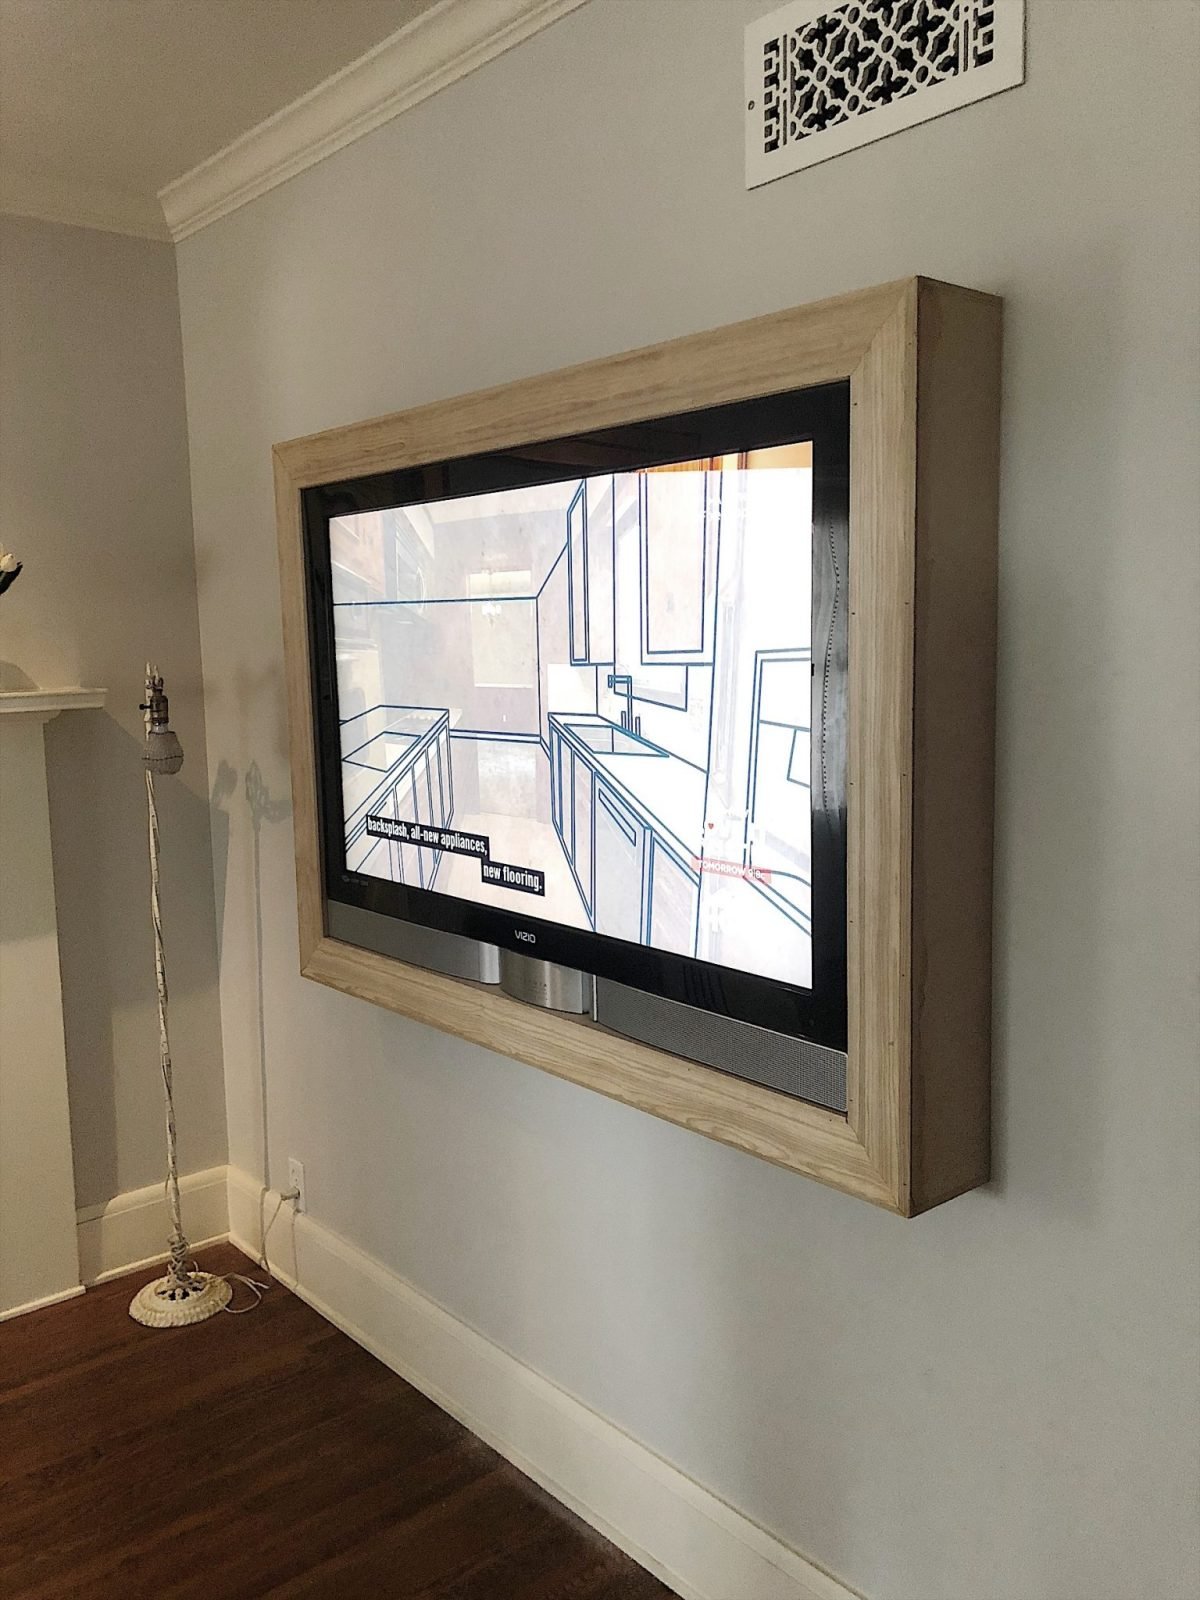 A TV mounted on a wall with a wooden frame